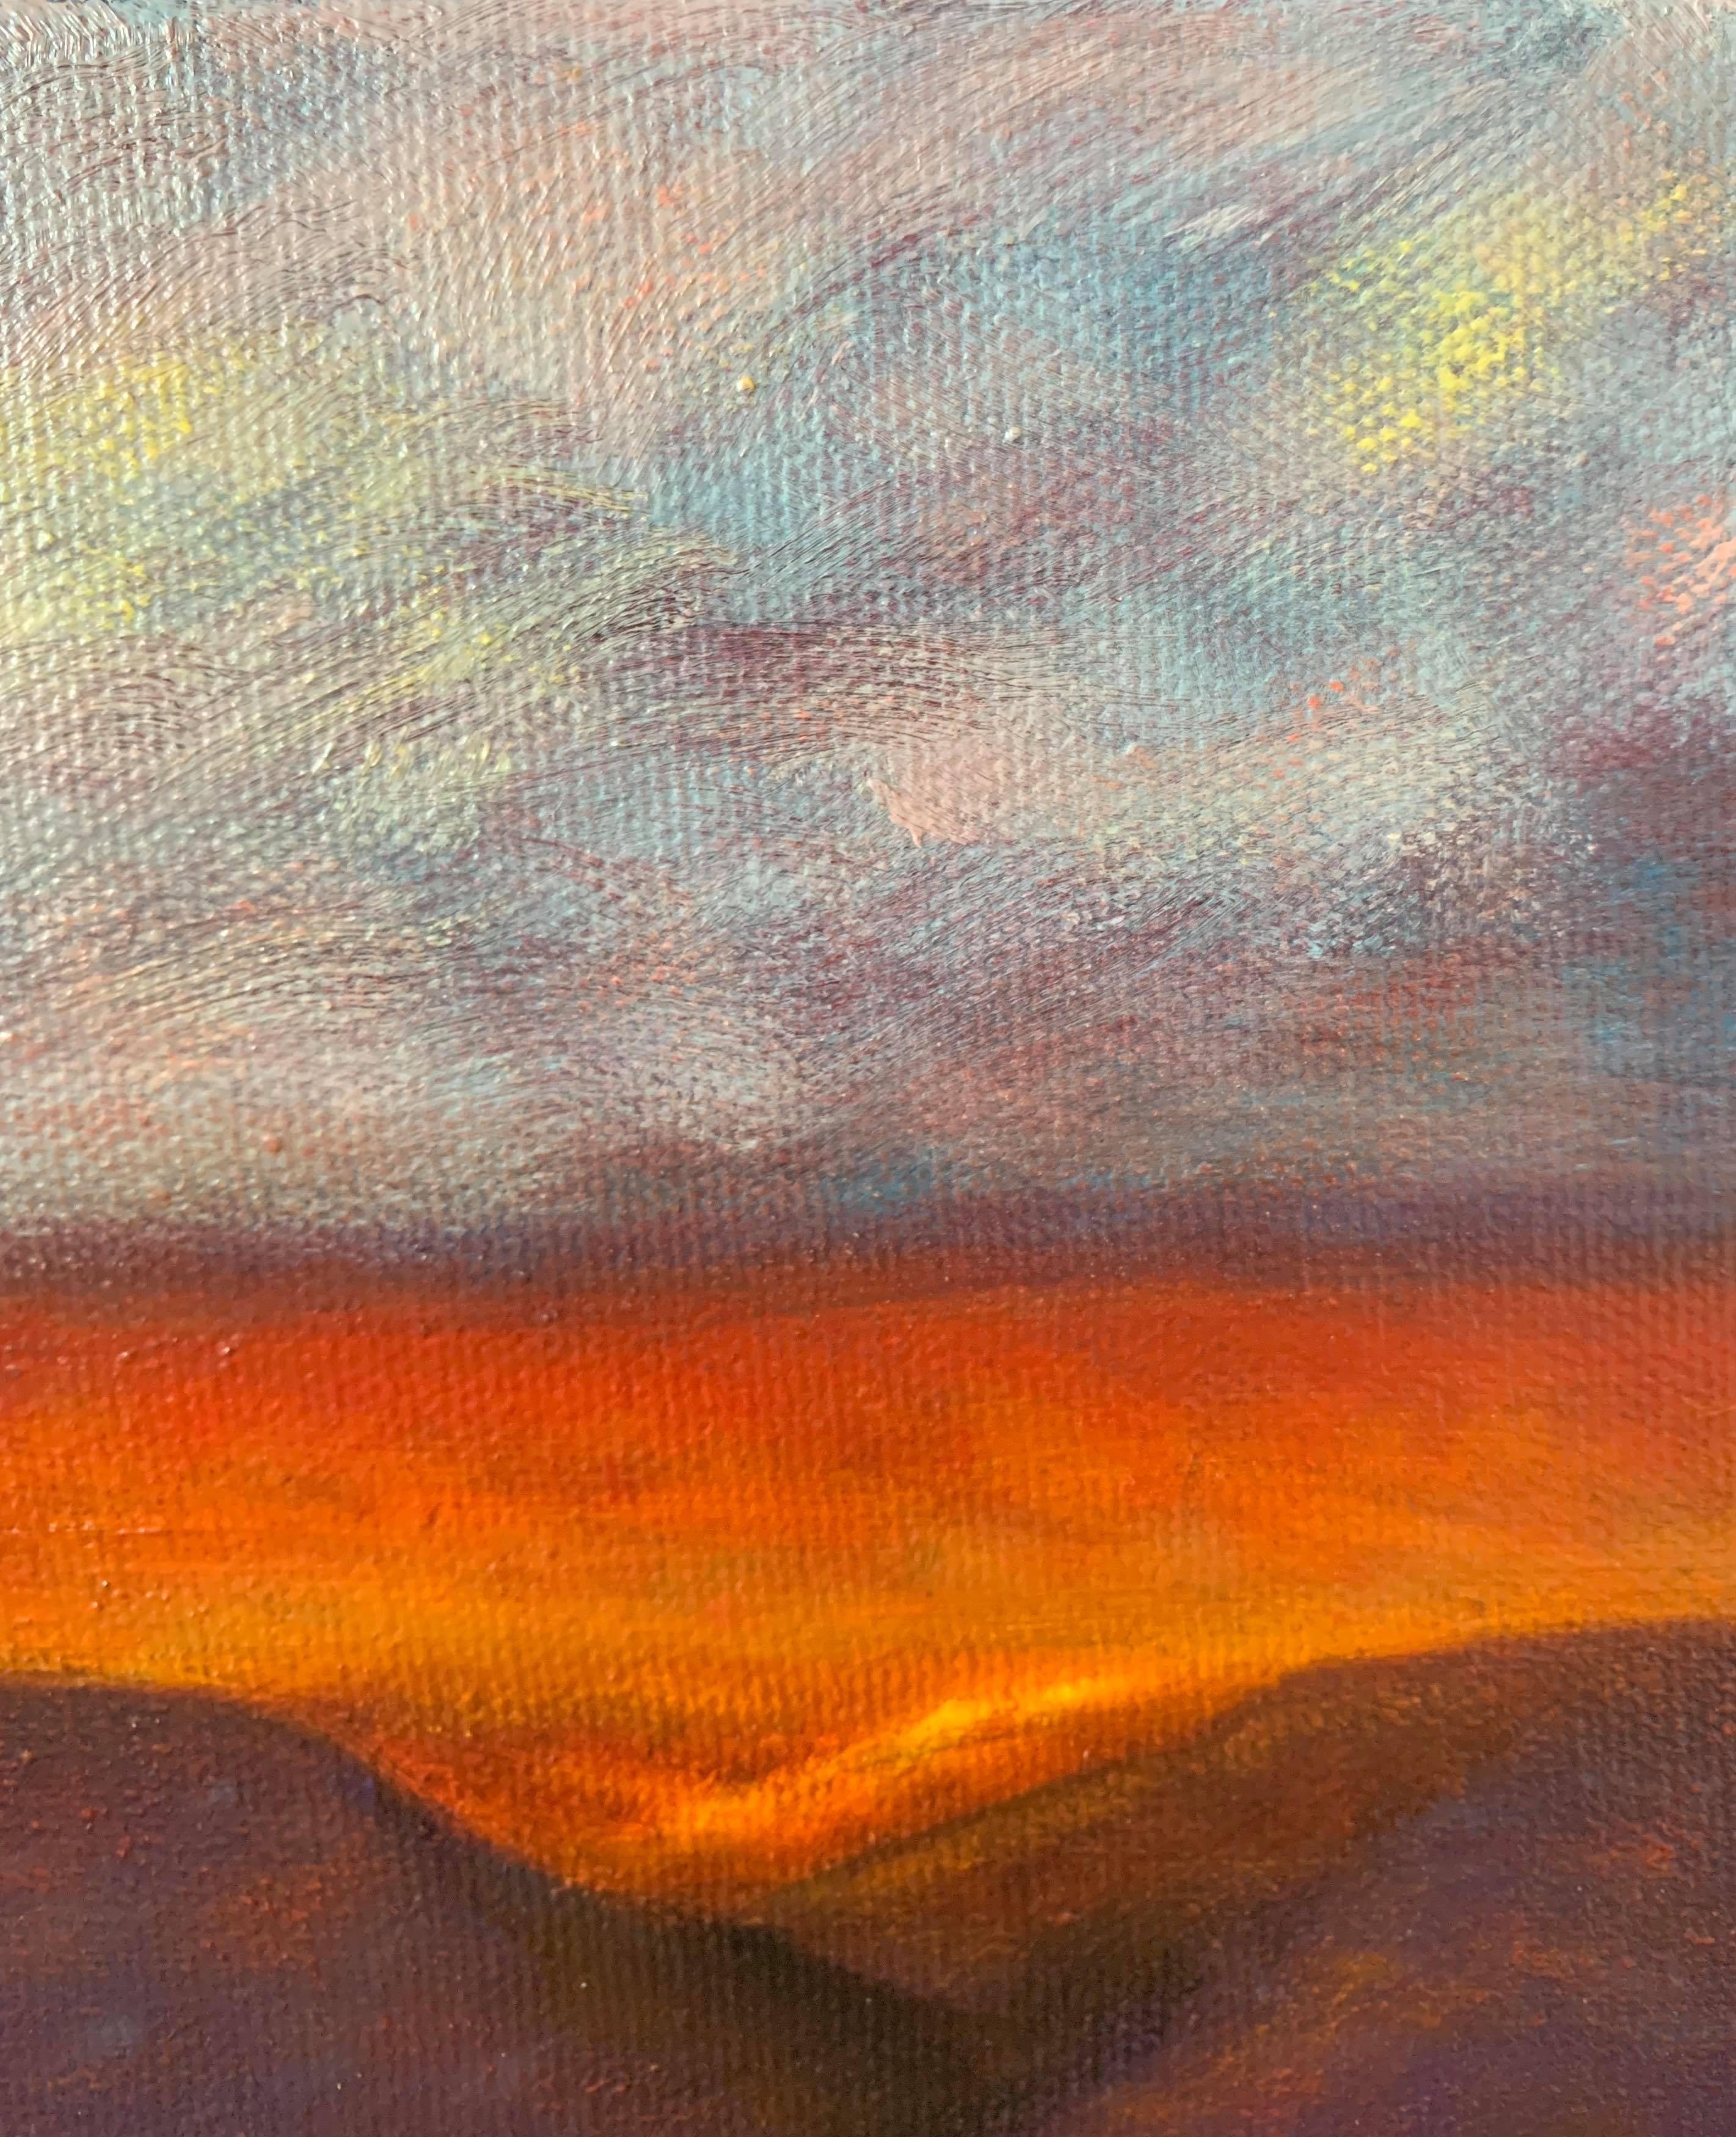 This oil painting shows a desert landscape with glowing red sand, violet mountains, and amethyst skies. In the foreground, rippled by the wind, are deep reddish sands. The small valleys between the mountains glow from the direct light of the sun.